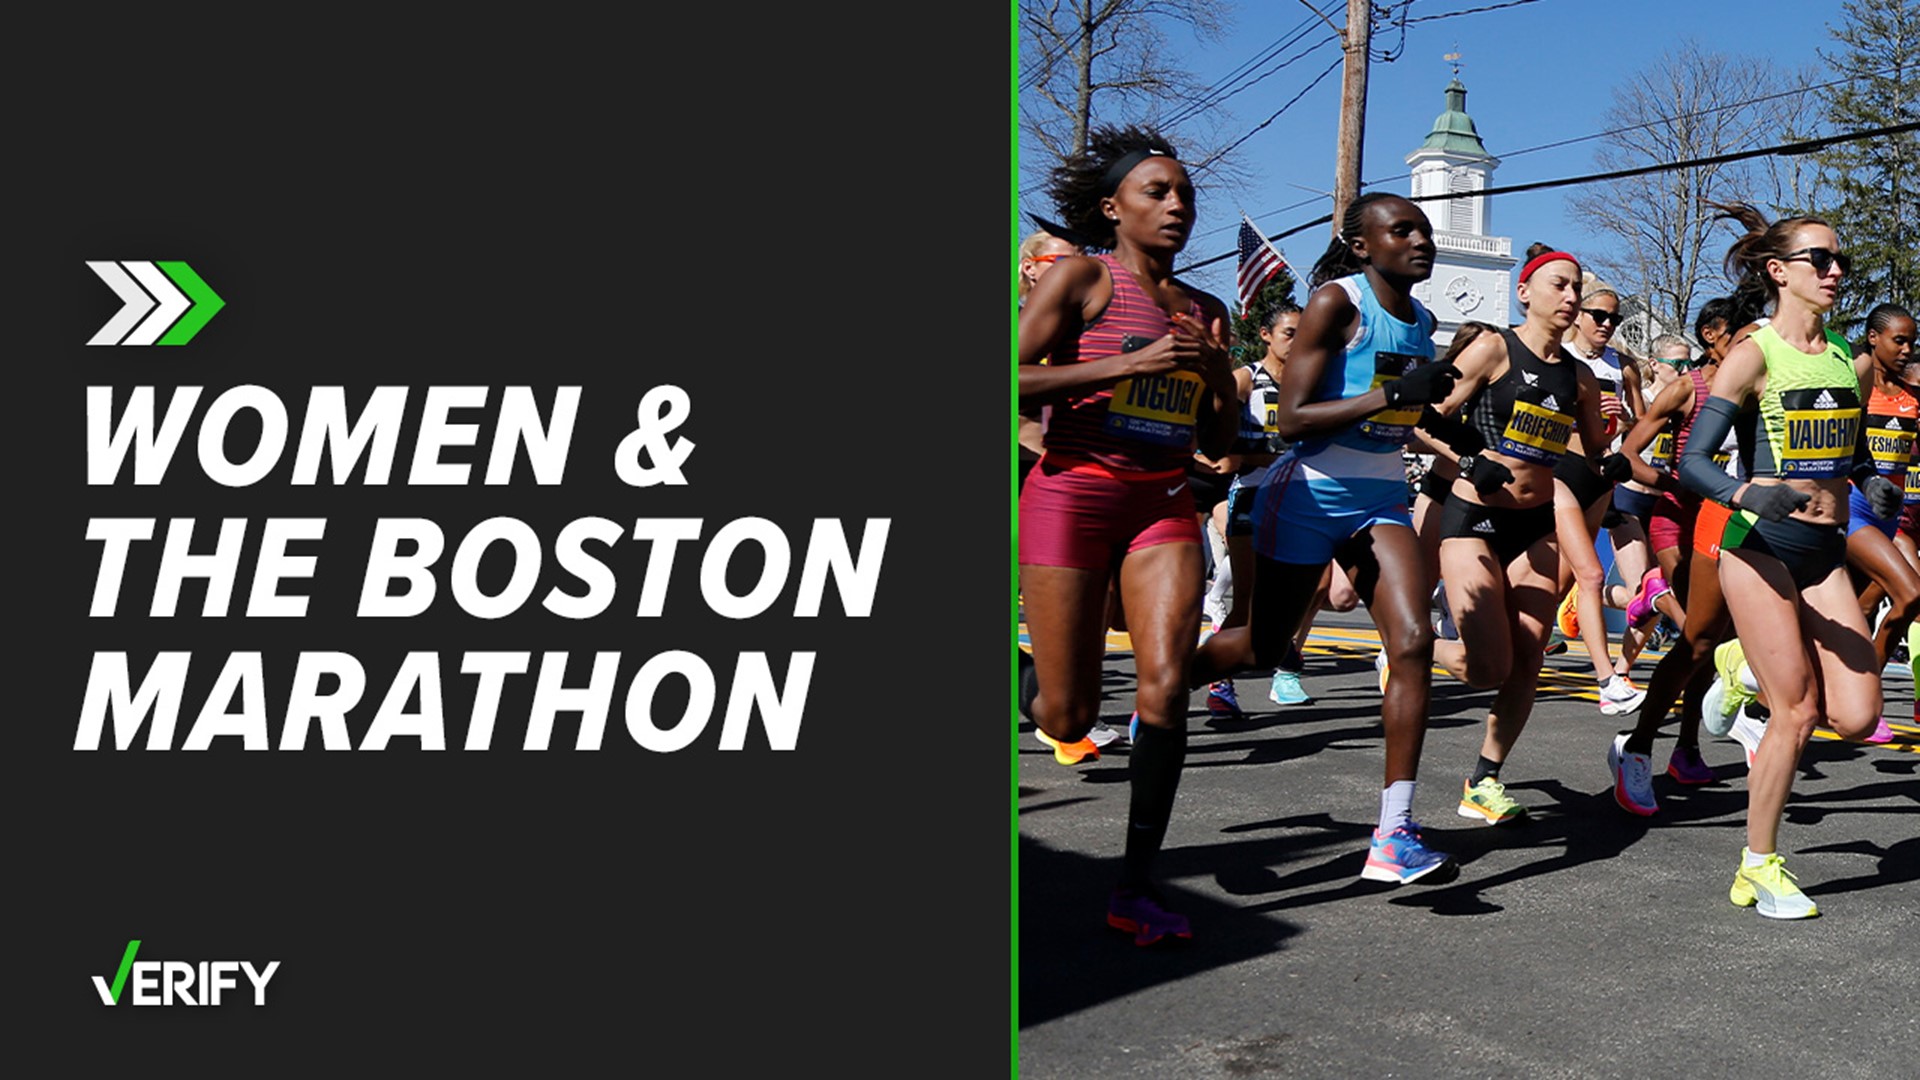 Bobbi Gibb and Kathrine Switzer were the first two women to run the Boston Marathon in the 1960s. Women weren’t officially allowed to compete in the race until 1972.